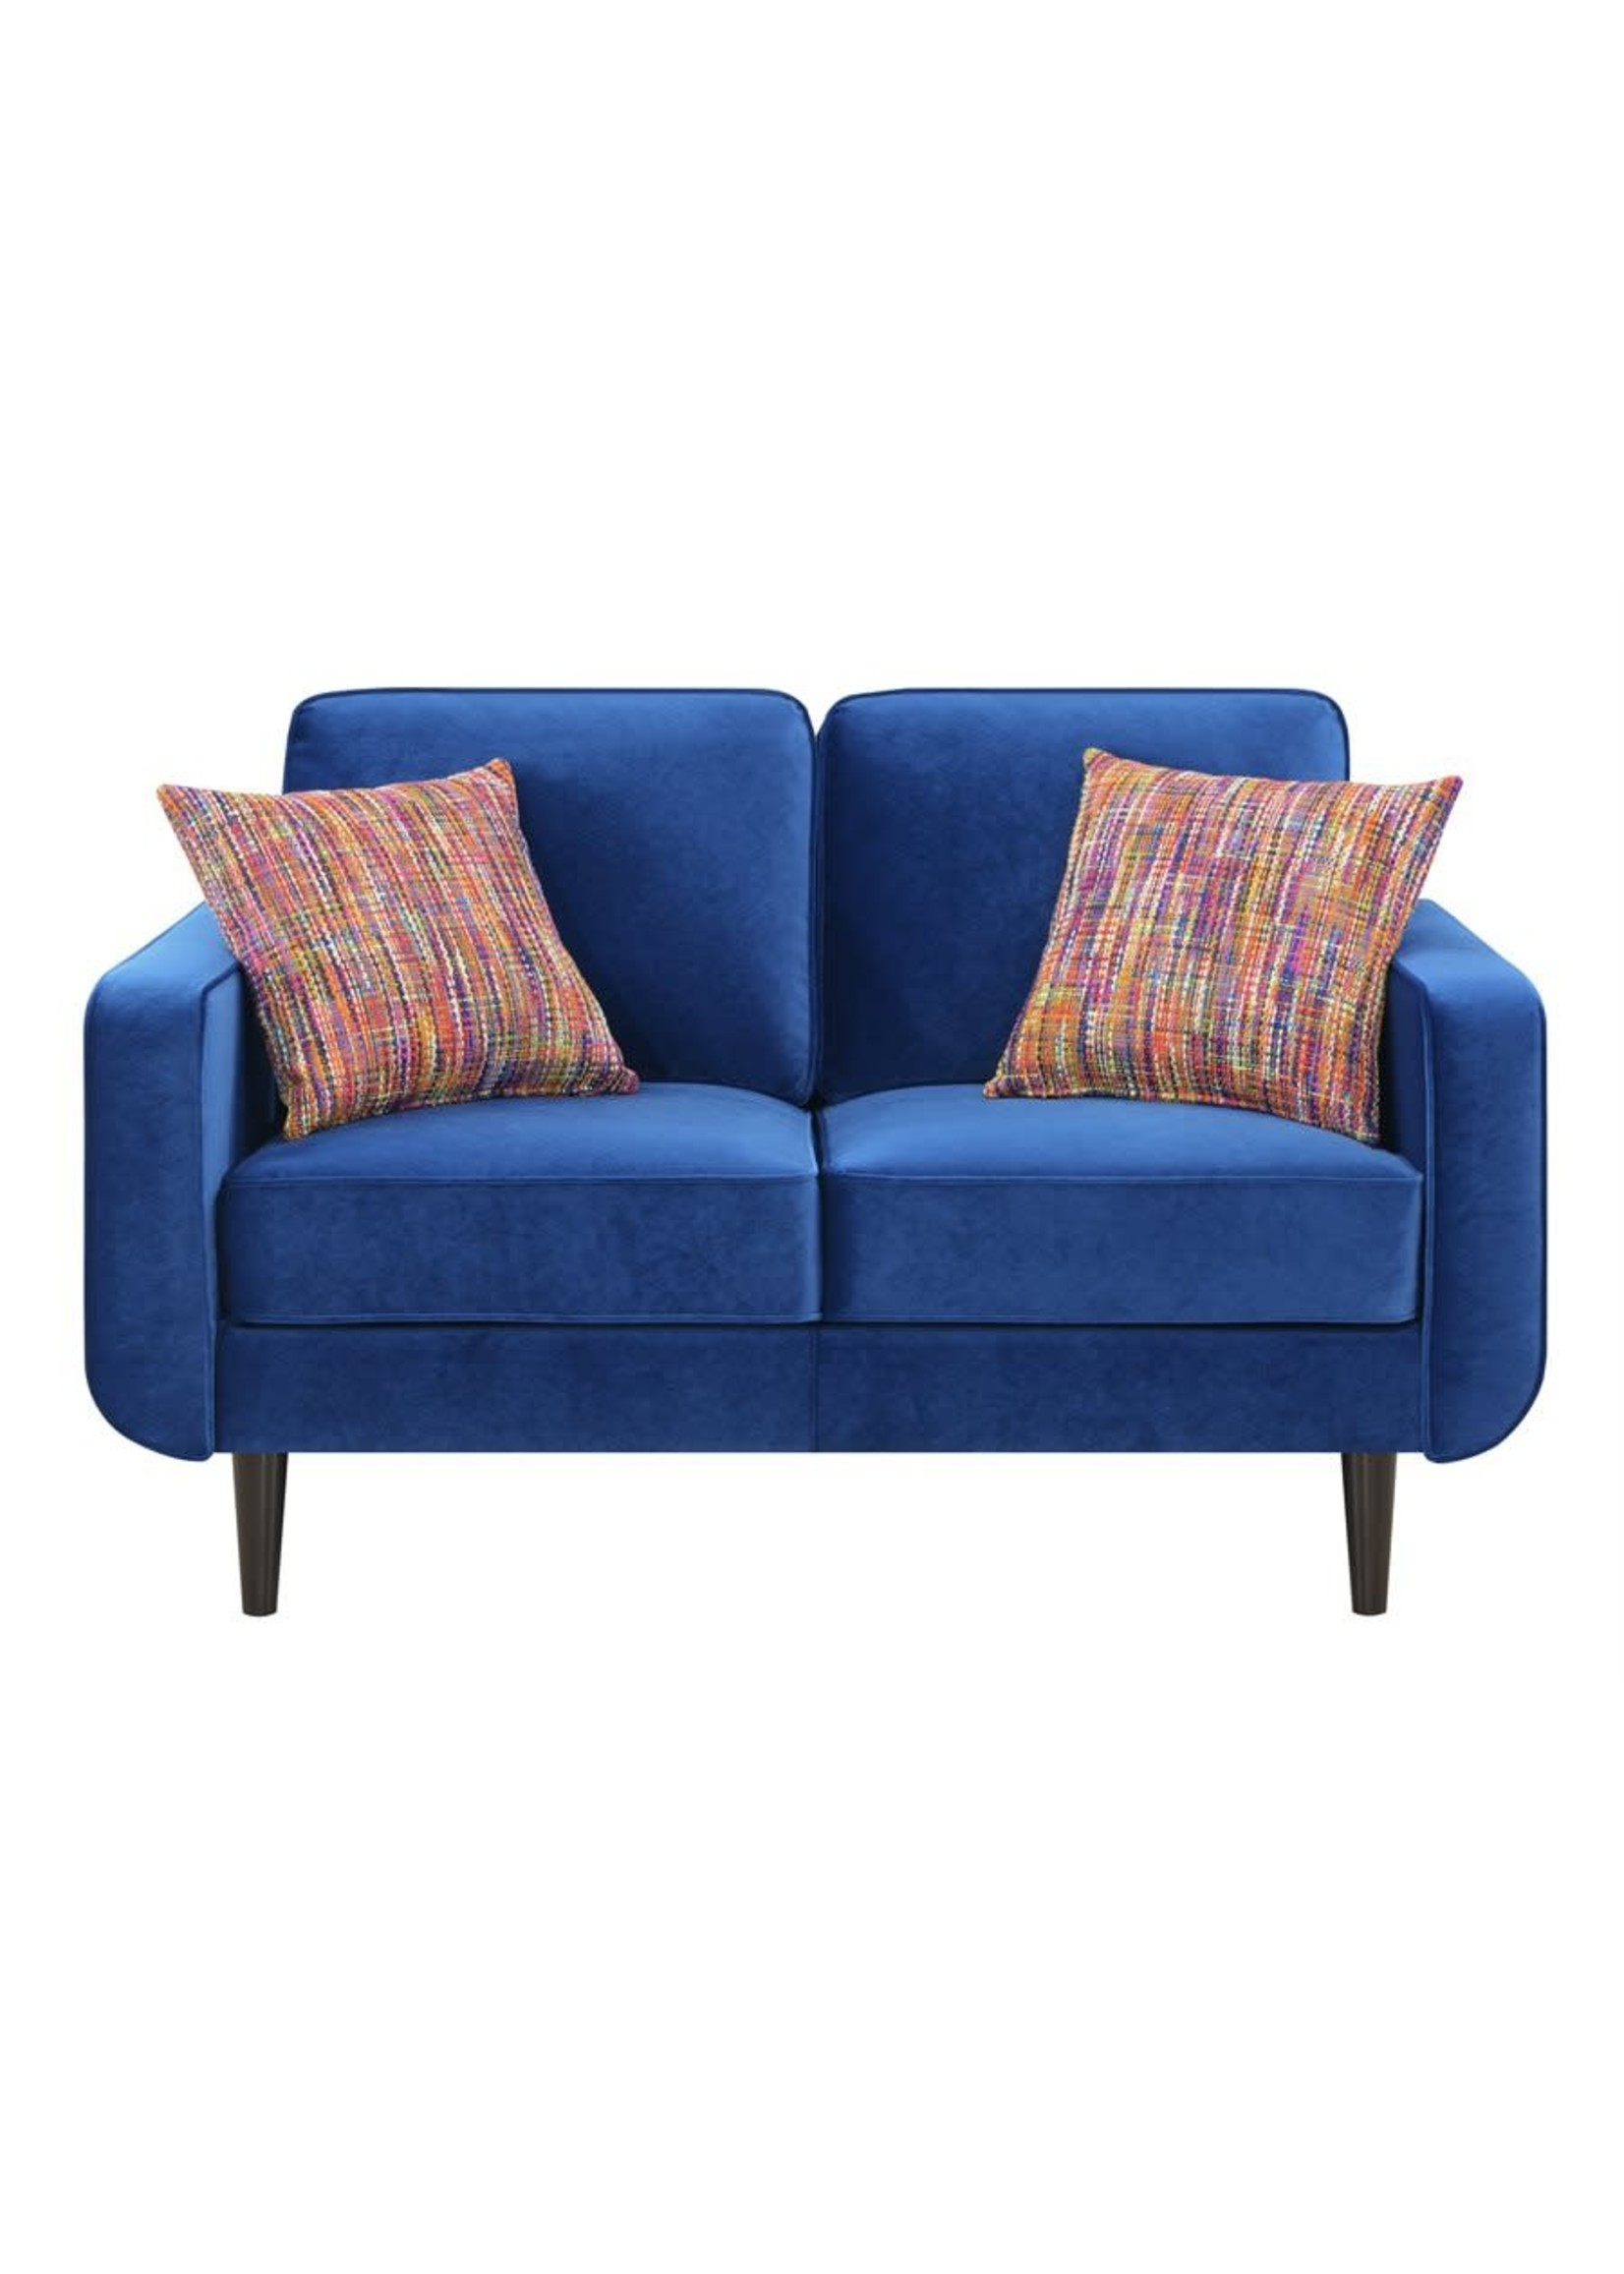 New Blue Loveseat EH 03906-01-04A